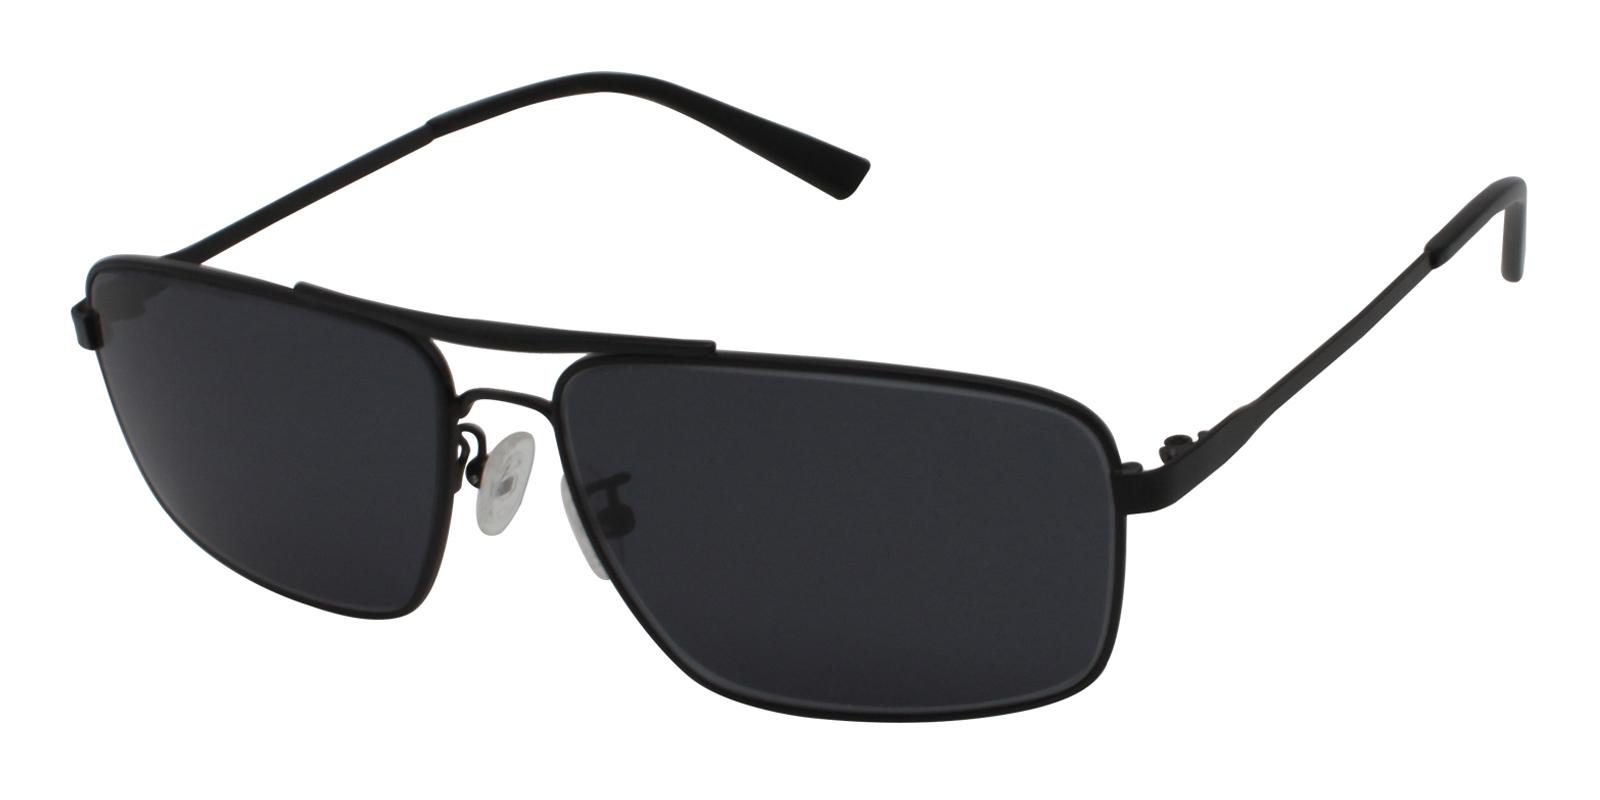 Ethan Black Metal NosePads , Sunglasses Frames from ABBE Glasses